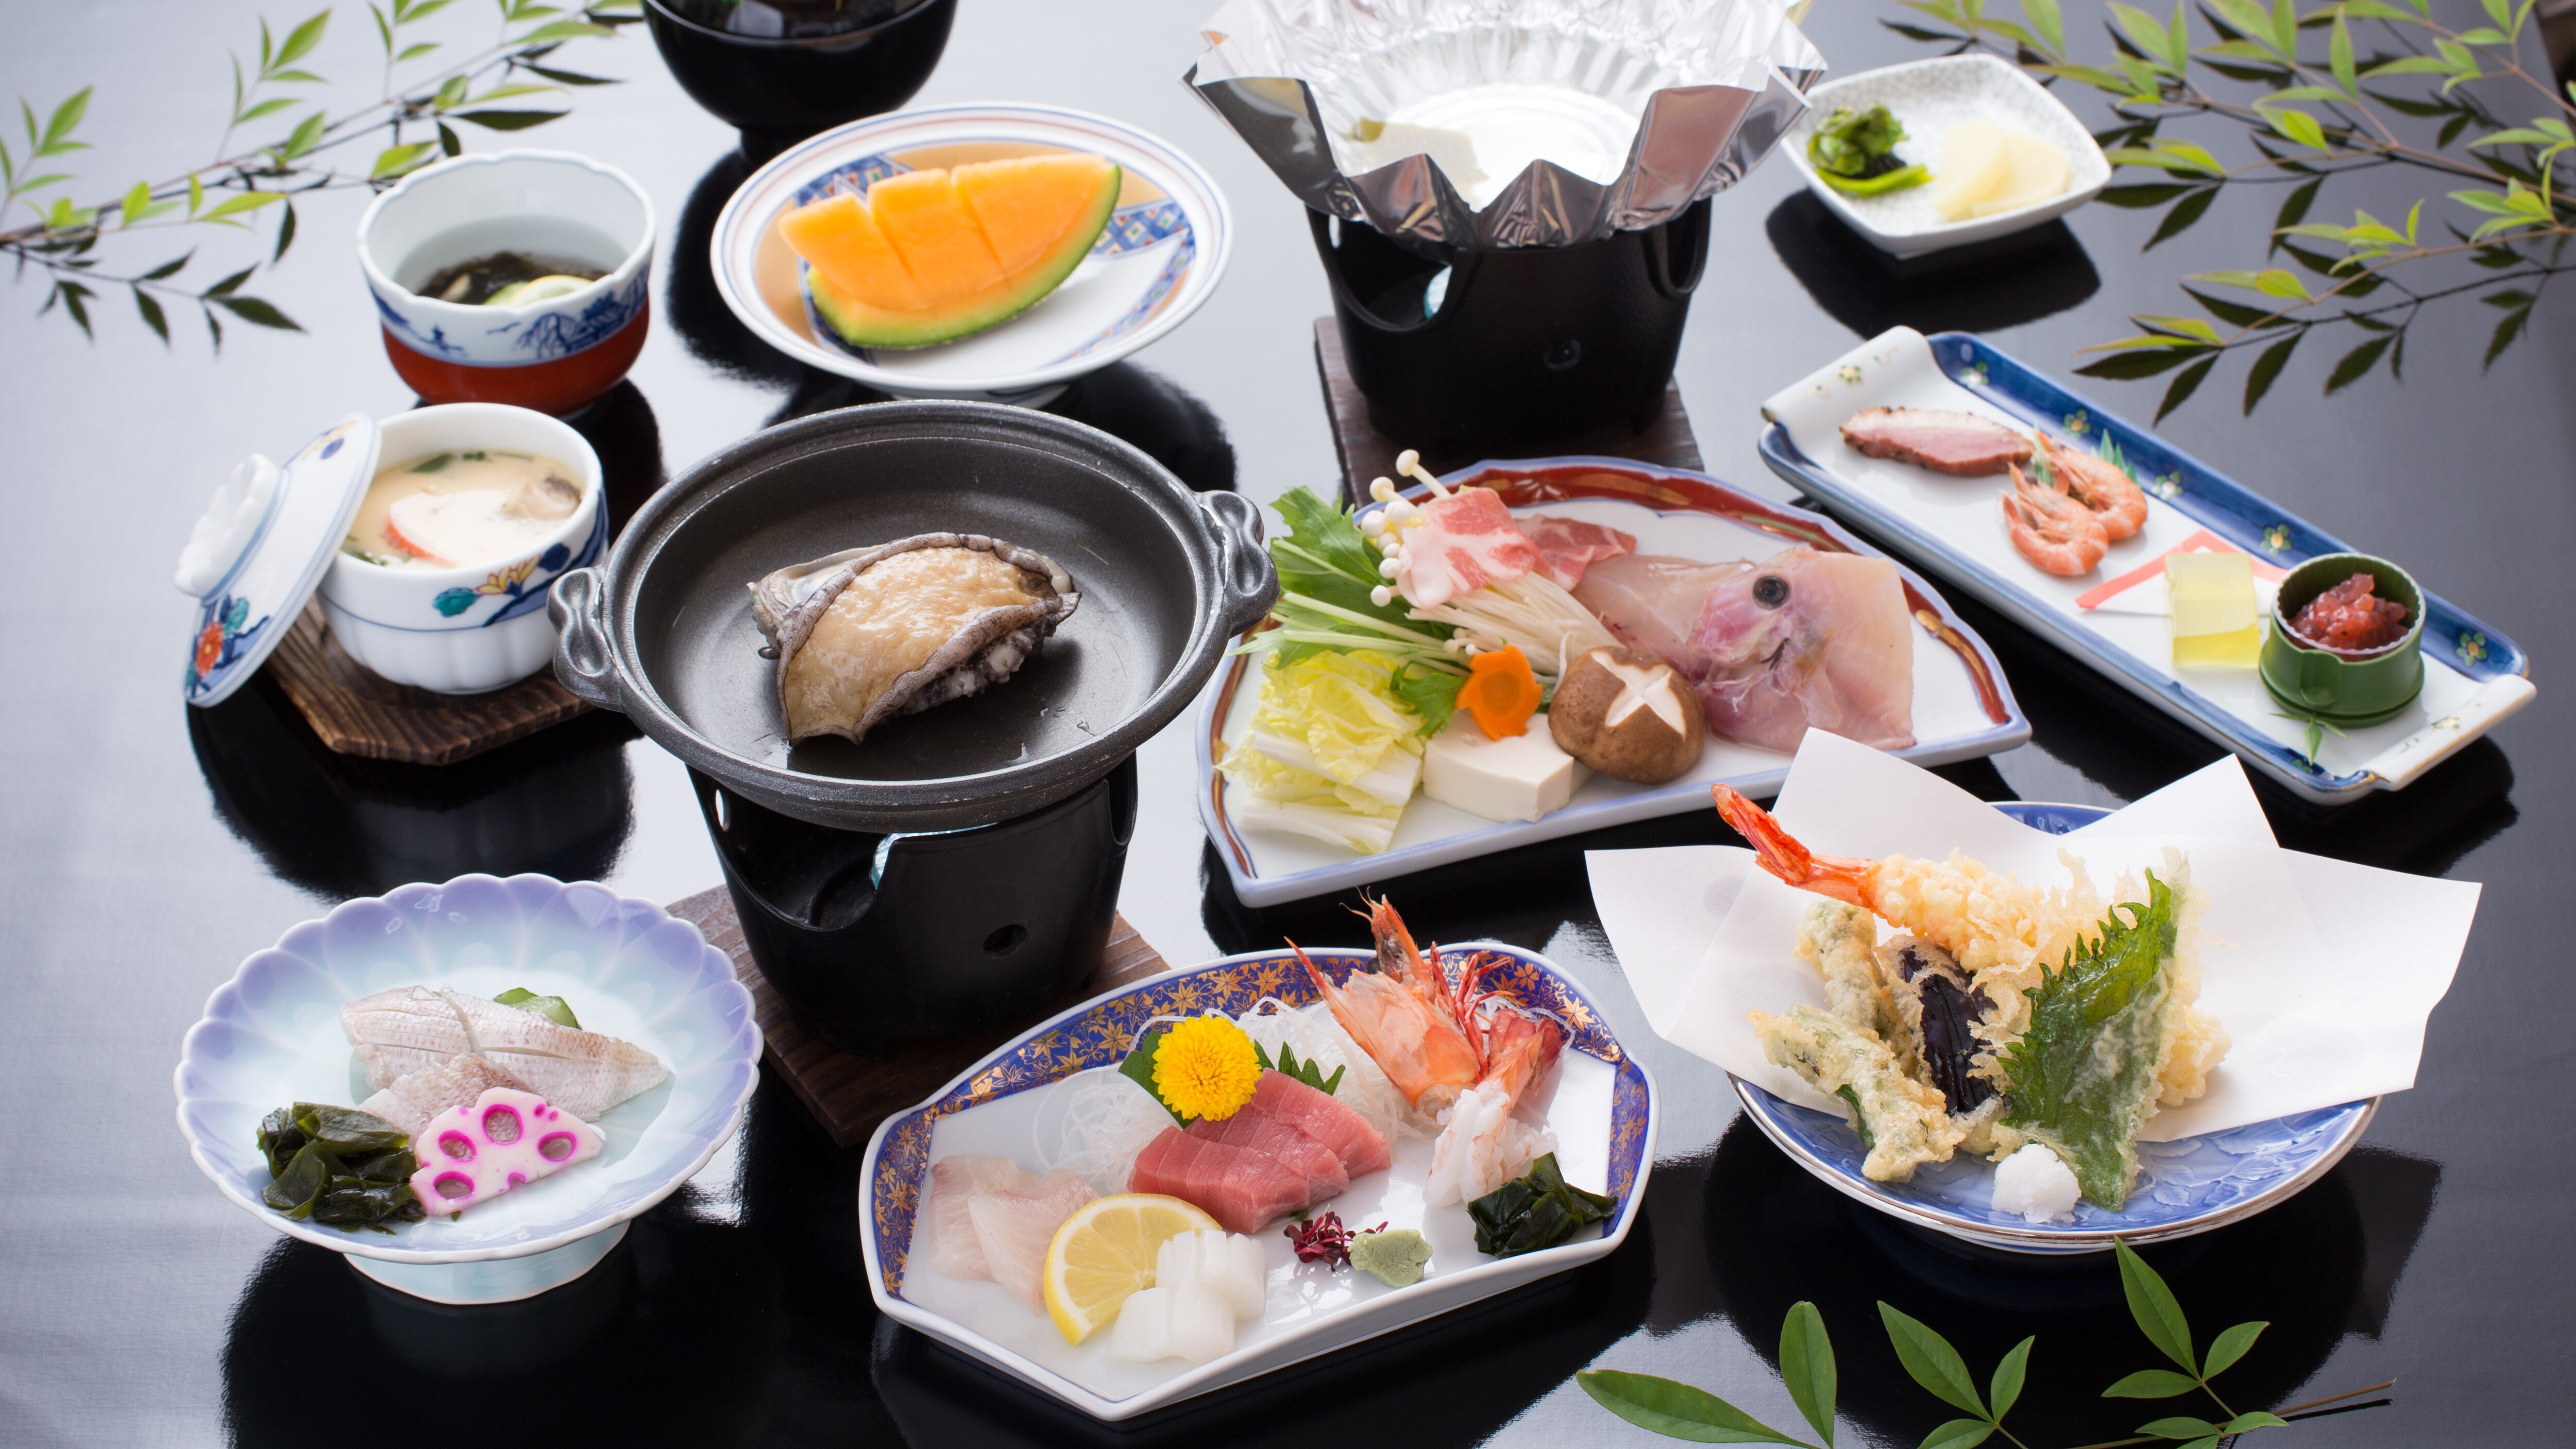 ◆ Abalone dance grilled seafood kaiseki (The photo is an example. We will prepare it with seasonal ingredients)